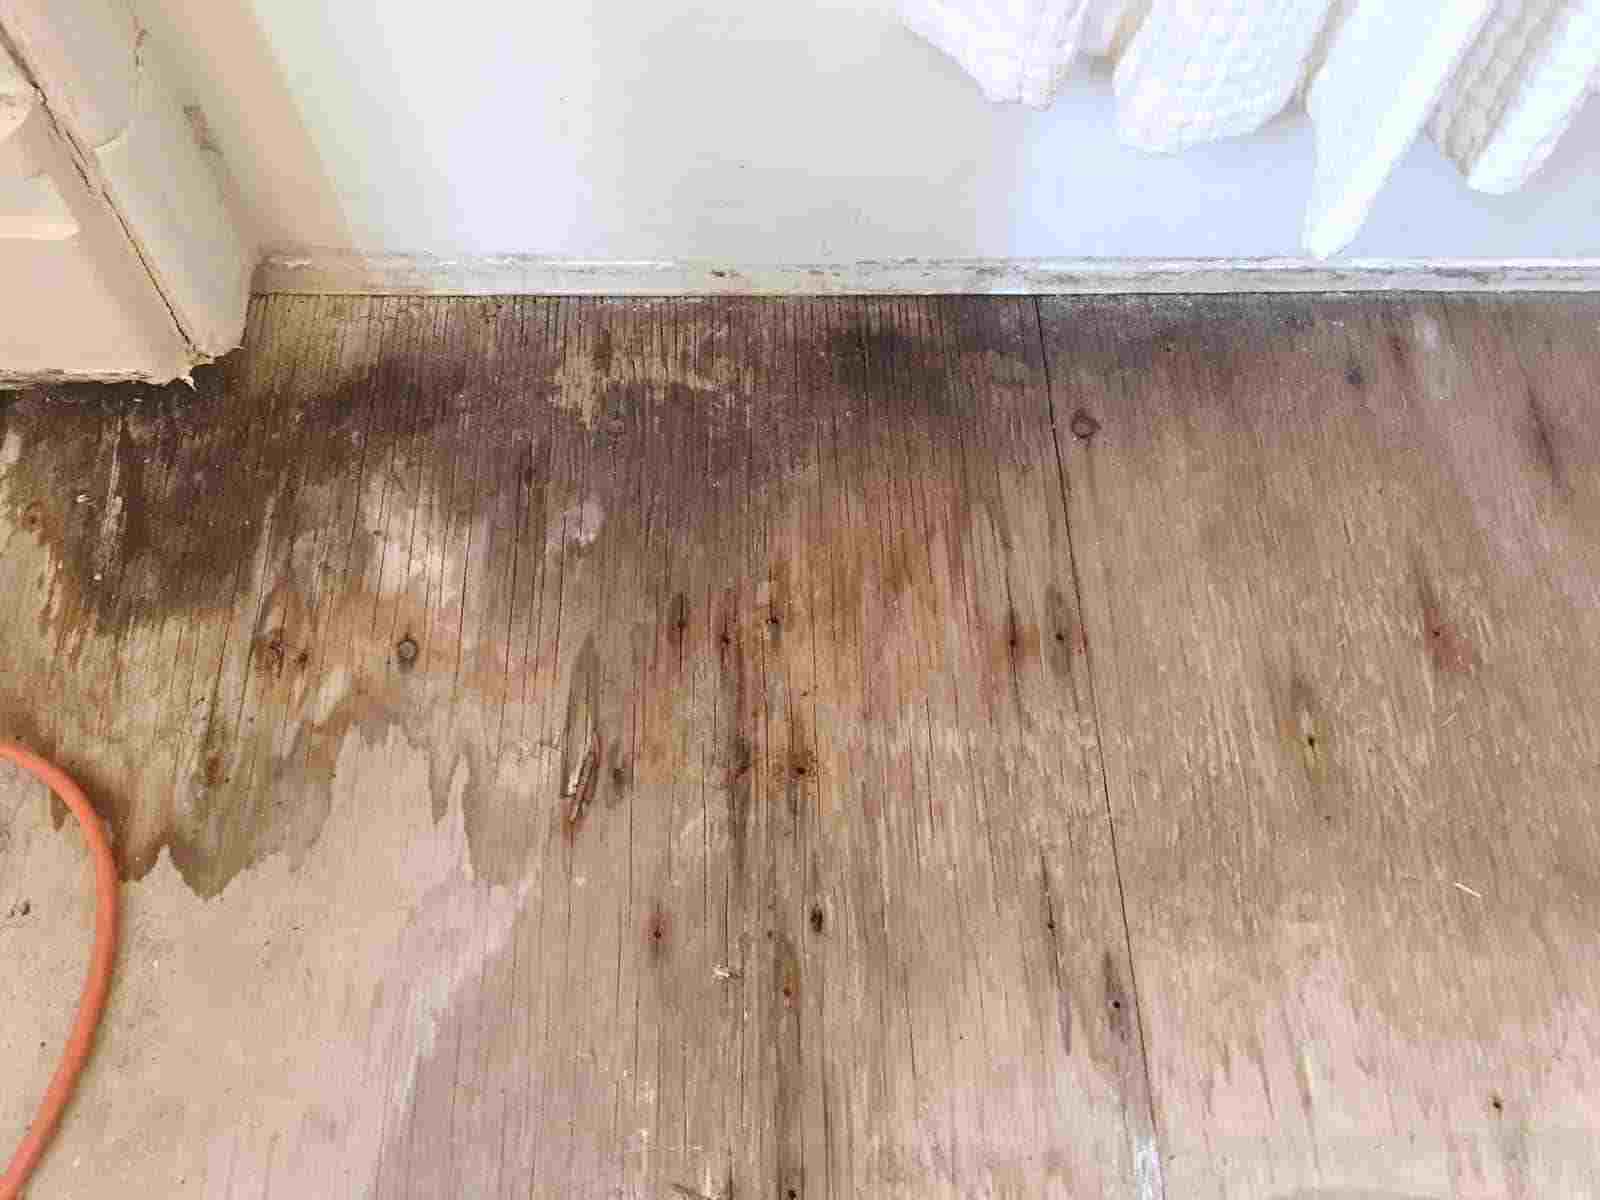 The-Patchy-Subfloor-Of-Floorboard